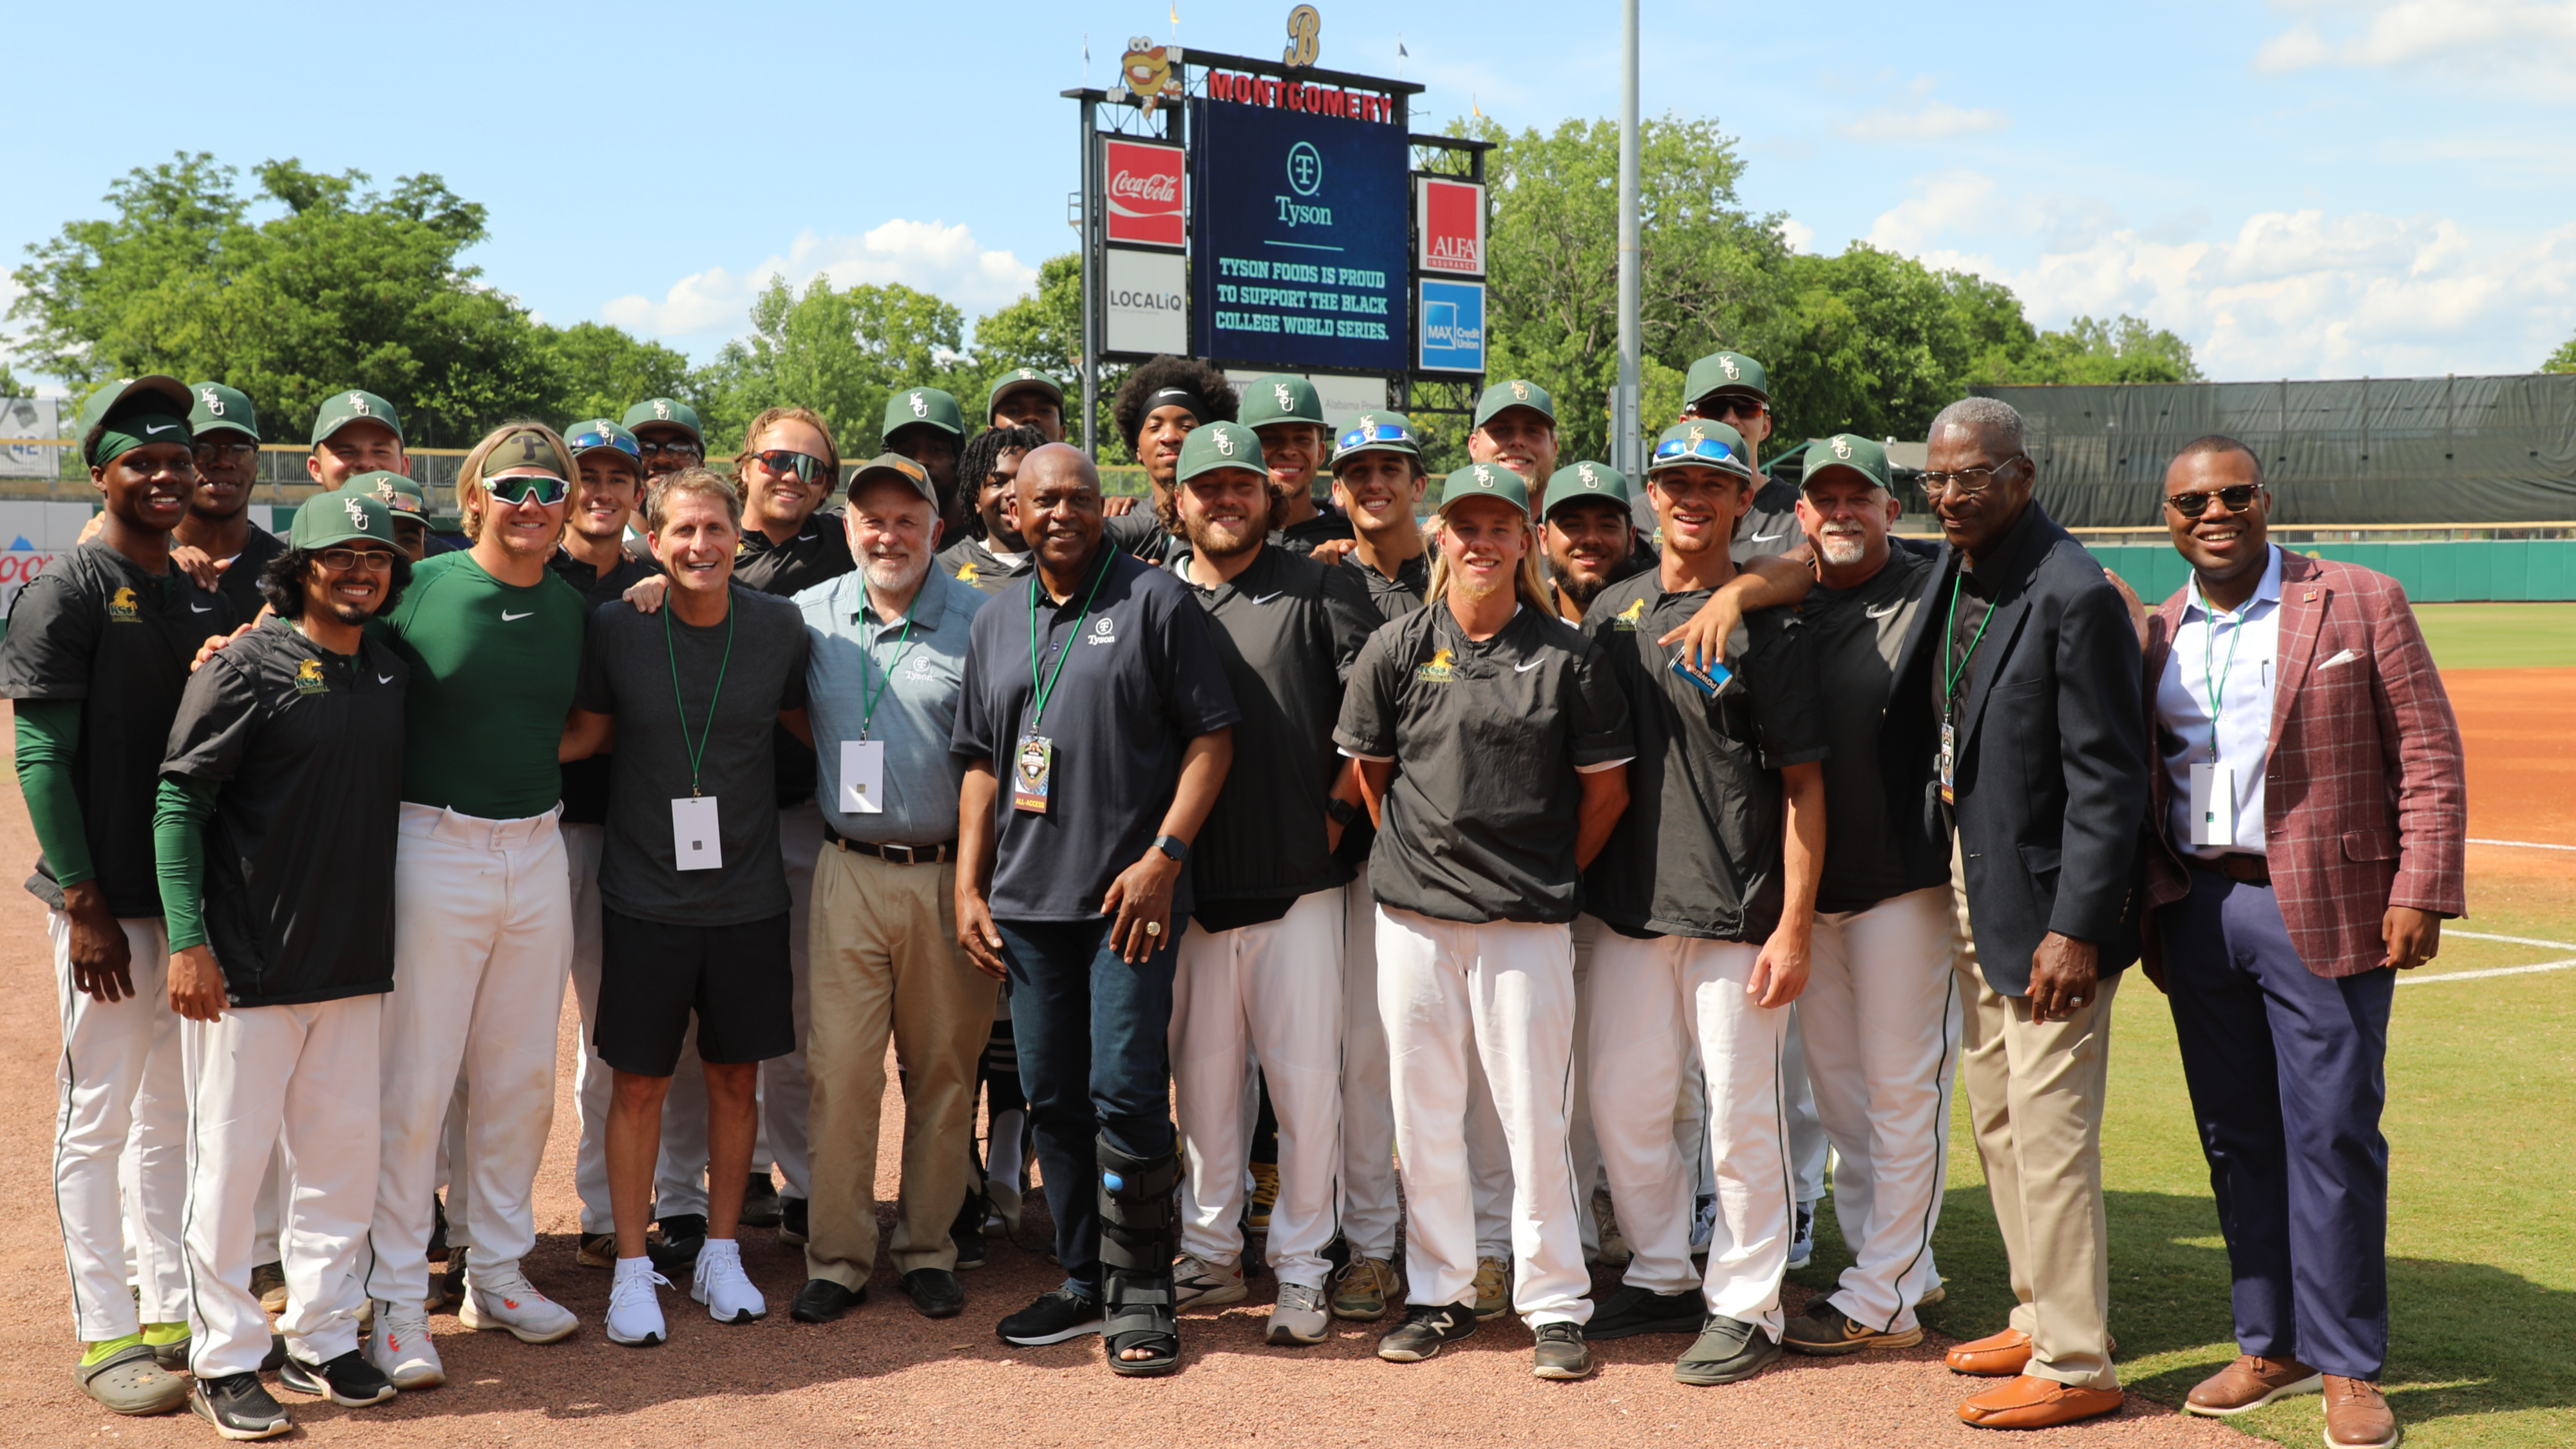 This is a group photo of a team that played in the Black College World Series.